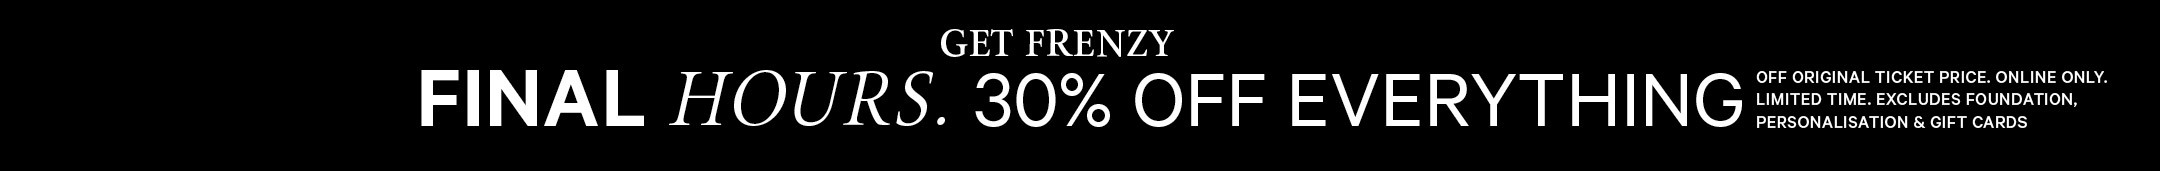 Last Chance 30% Off Everything. Get Frenzy! Online Exclusive